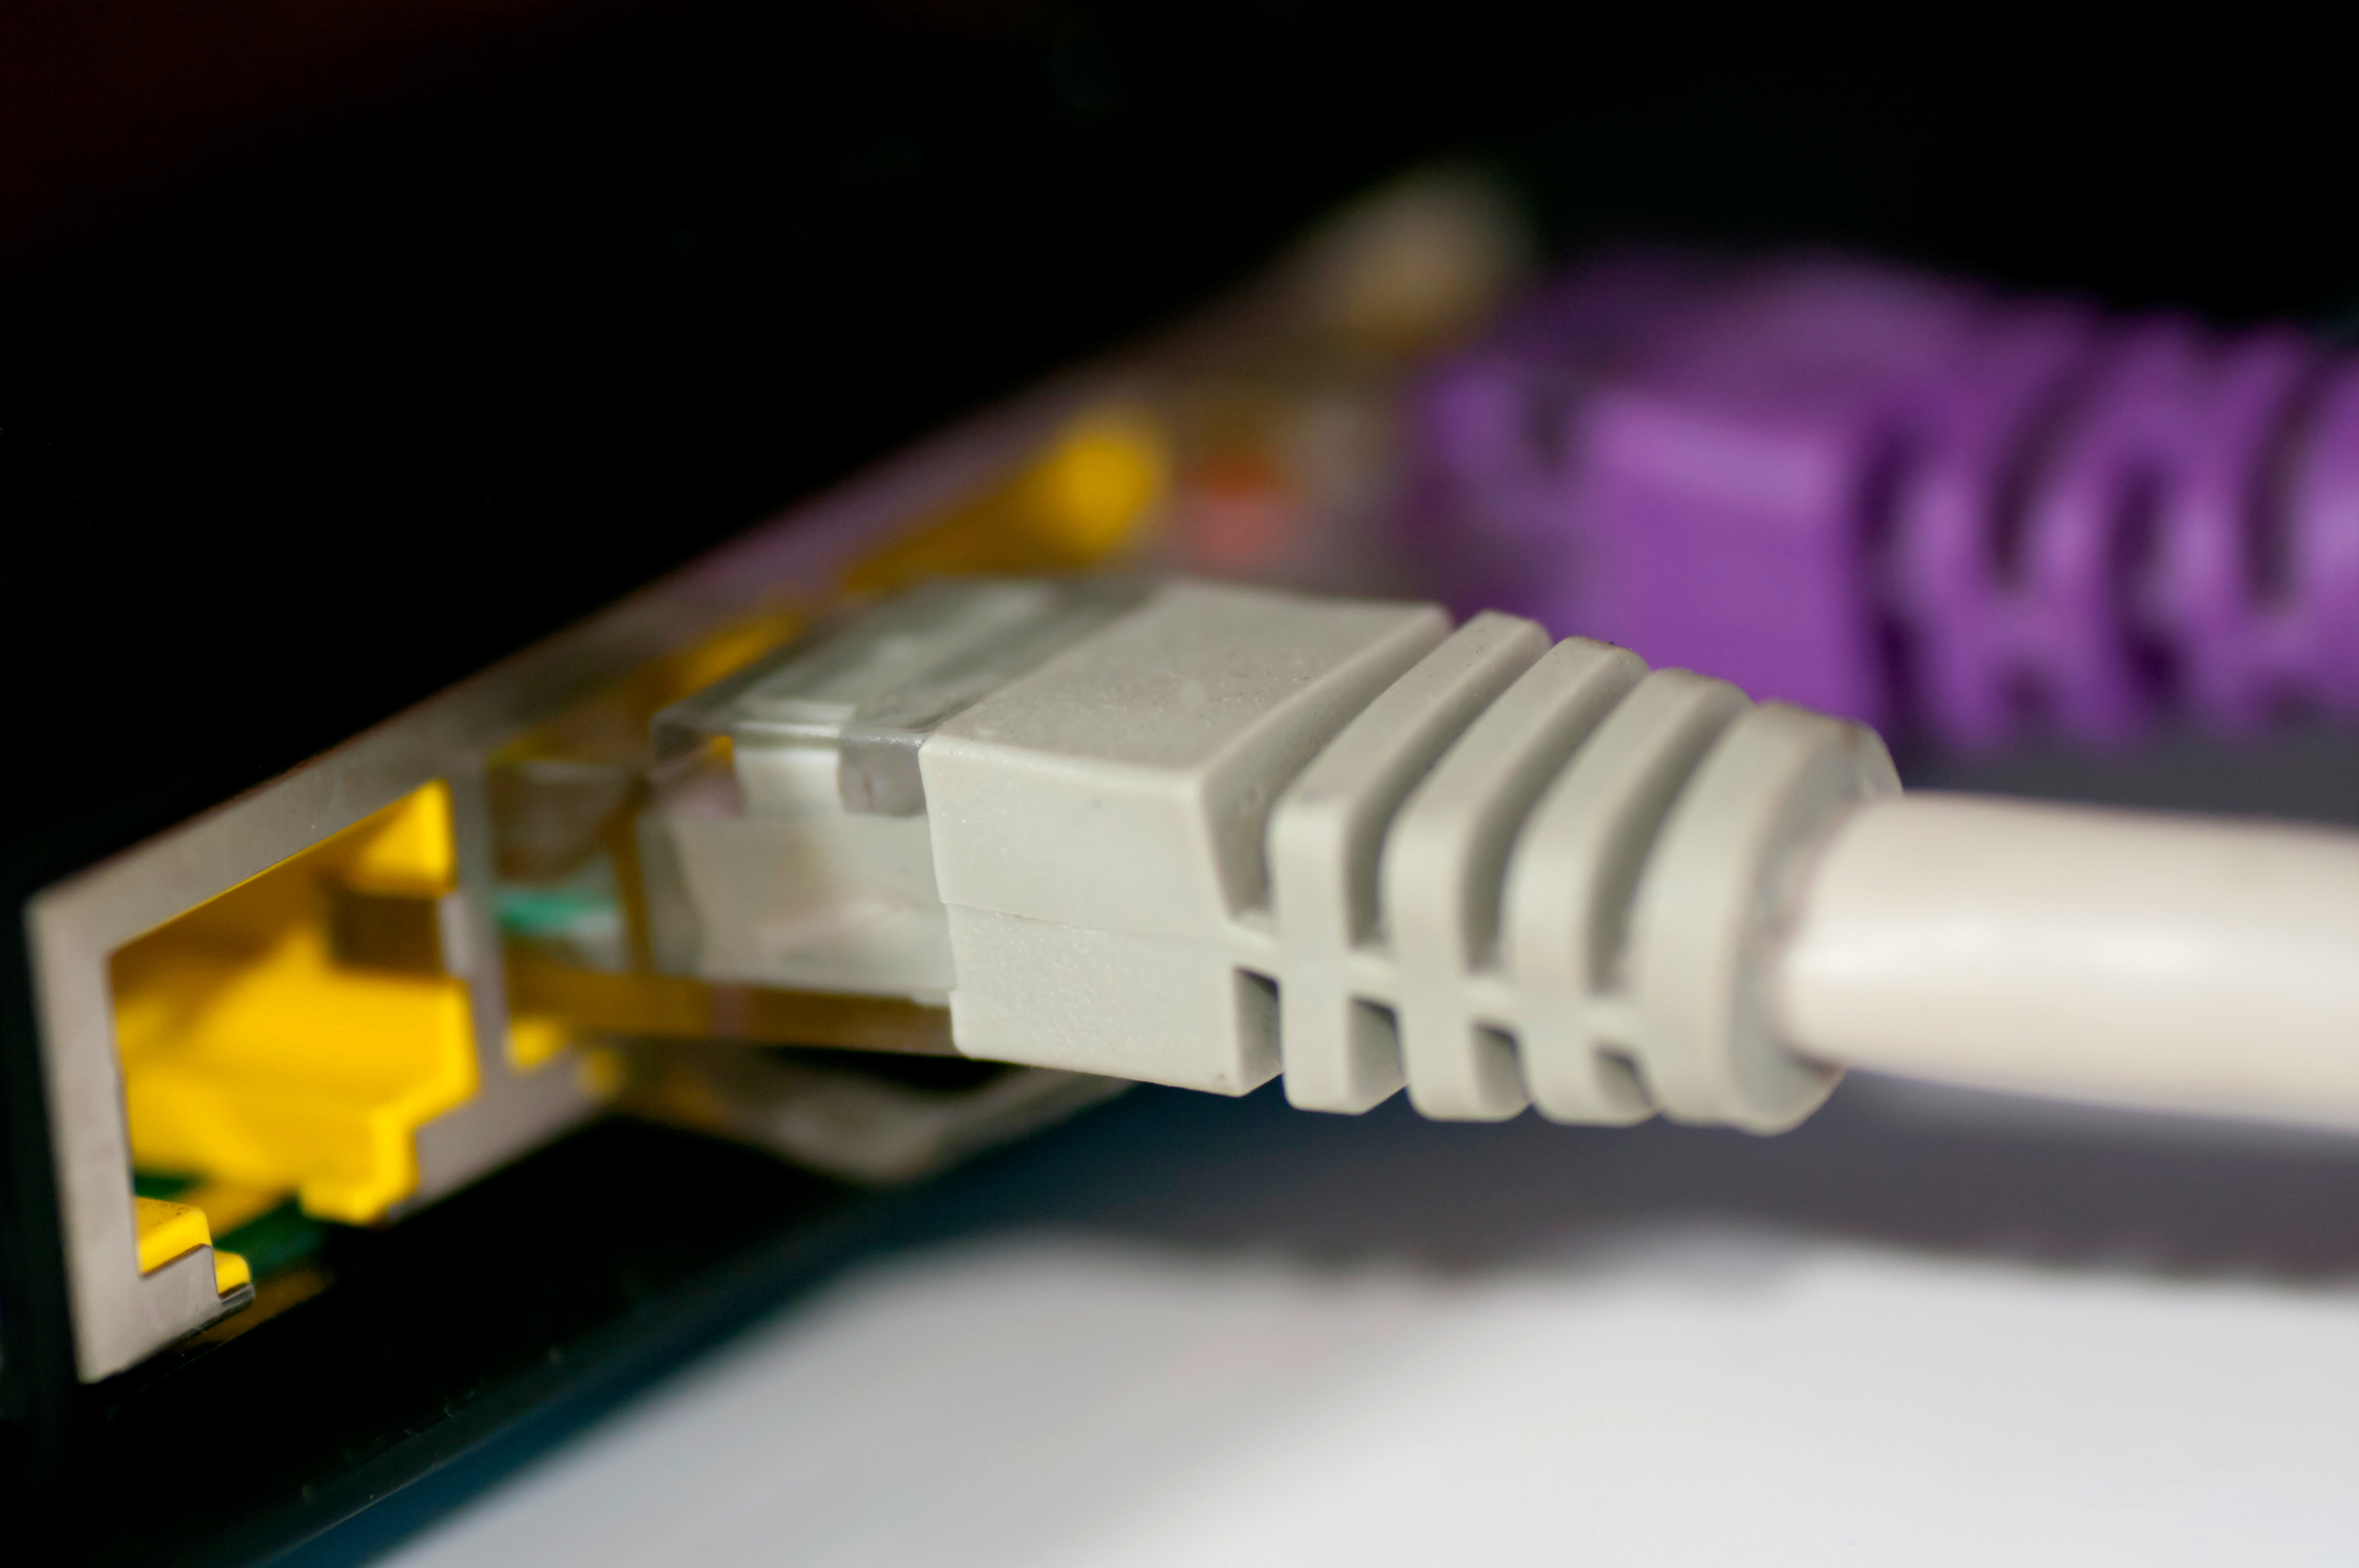 Close-up image of an Ethernet cable plugged into a network port, signifying internet connectivity